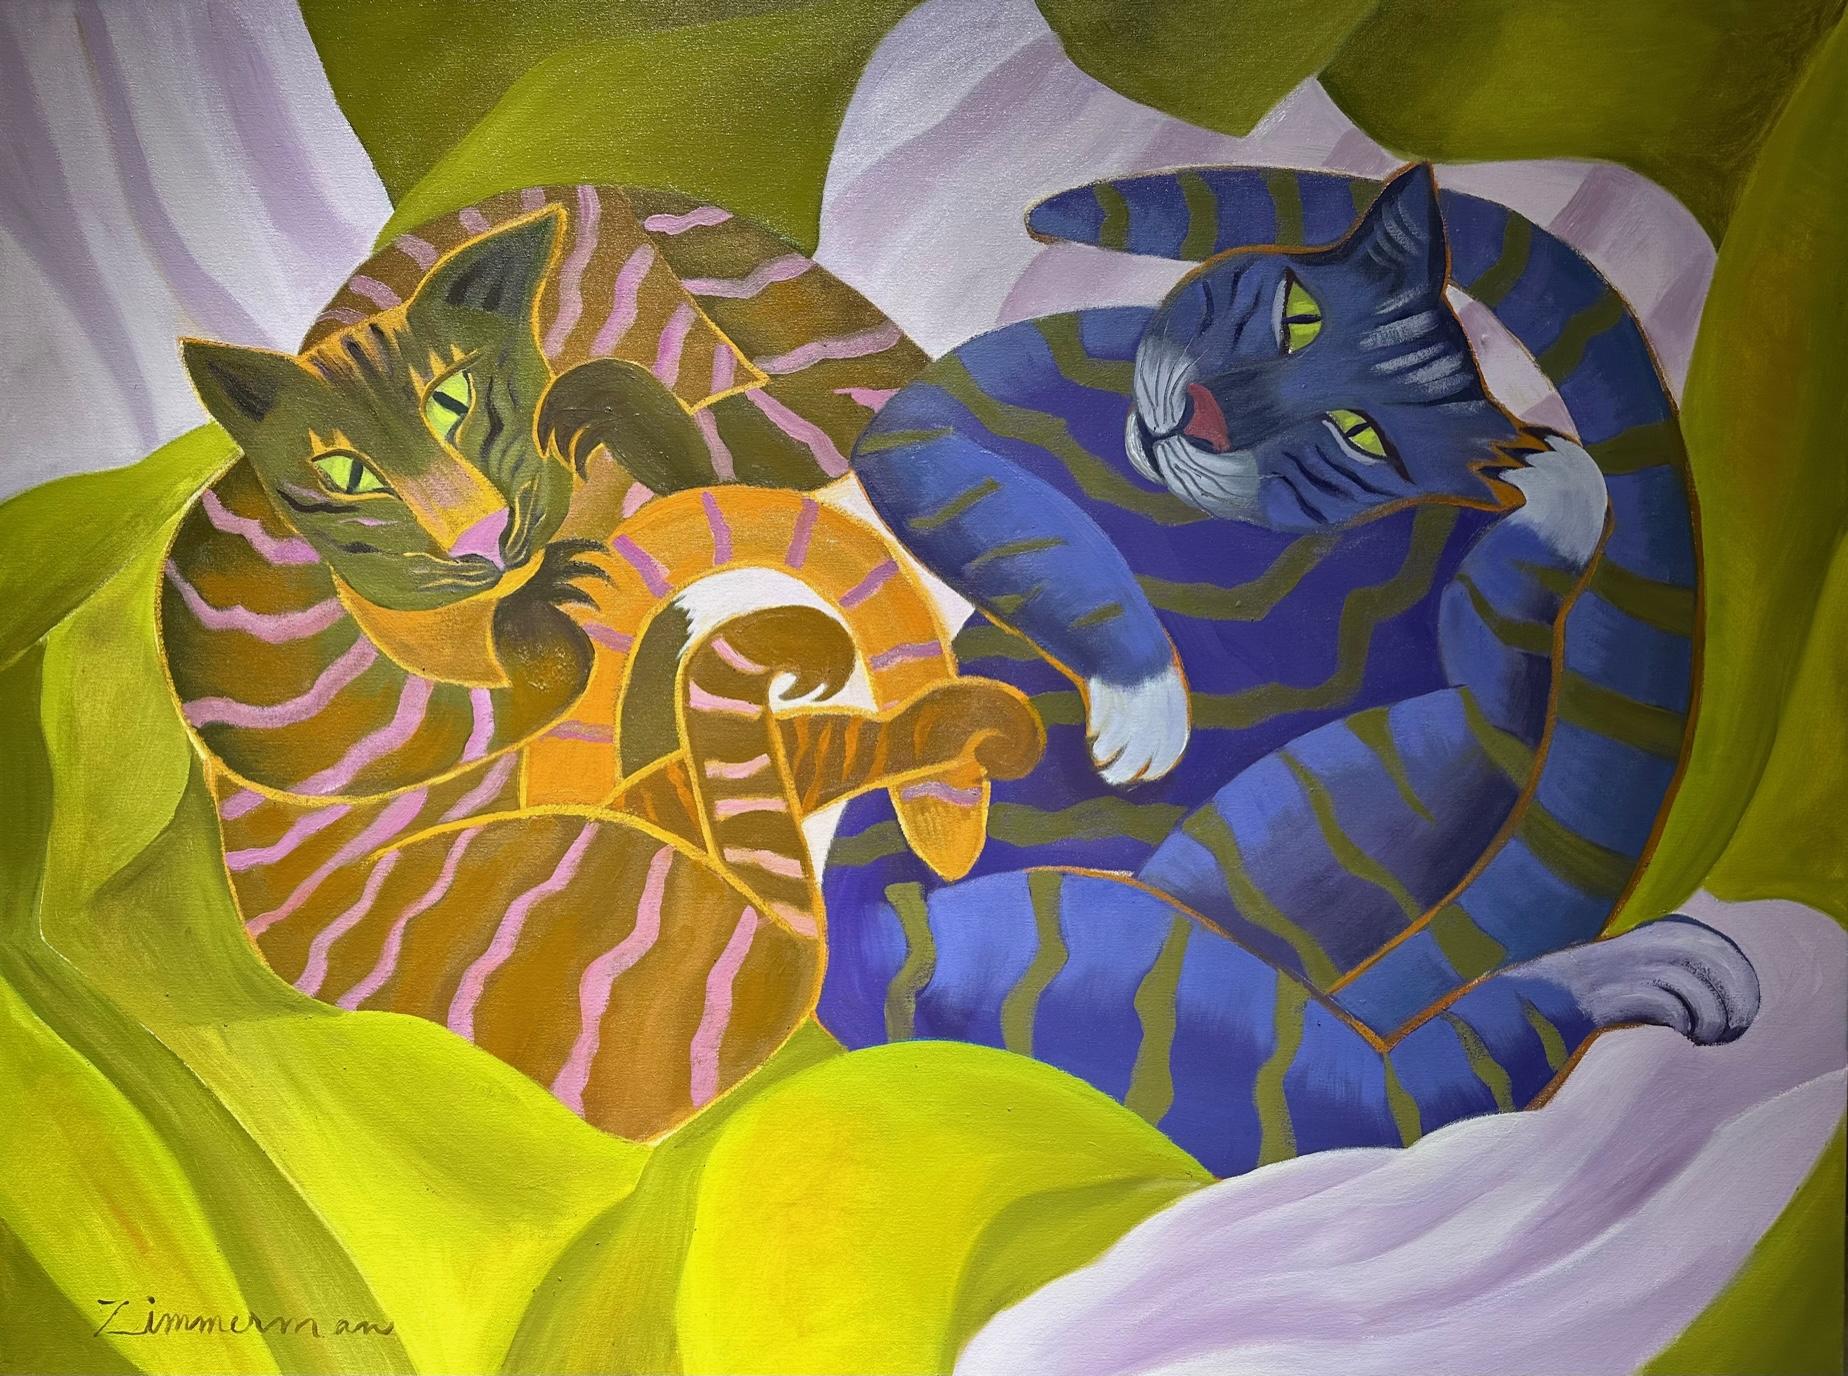 'Double Trouble' is a cheerful and lively painting that captures the playful and curious nature of cats in a beautiful setting.

'Double Trouble' adds a touch of whimsy and color to any room, while also creating a fun and inviting atmosphere that